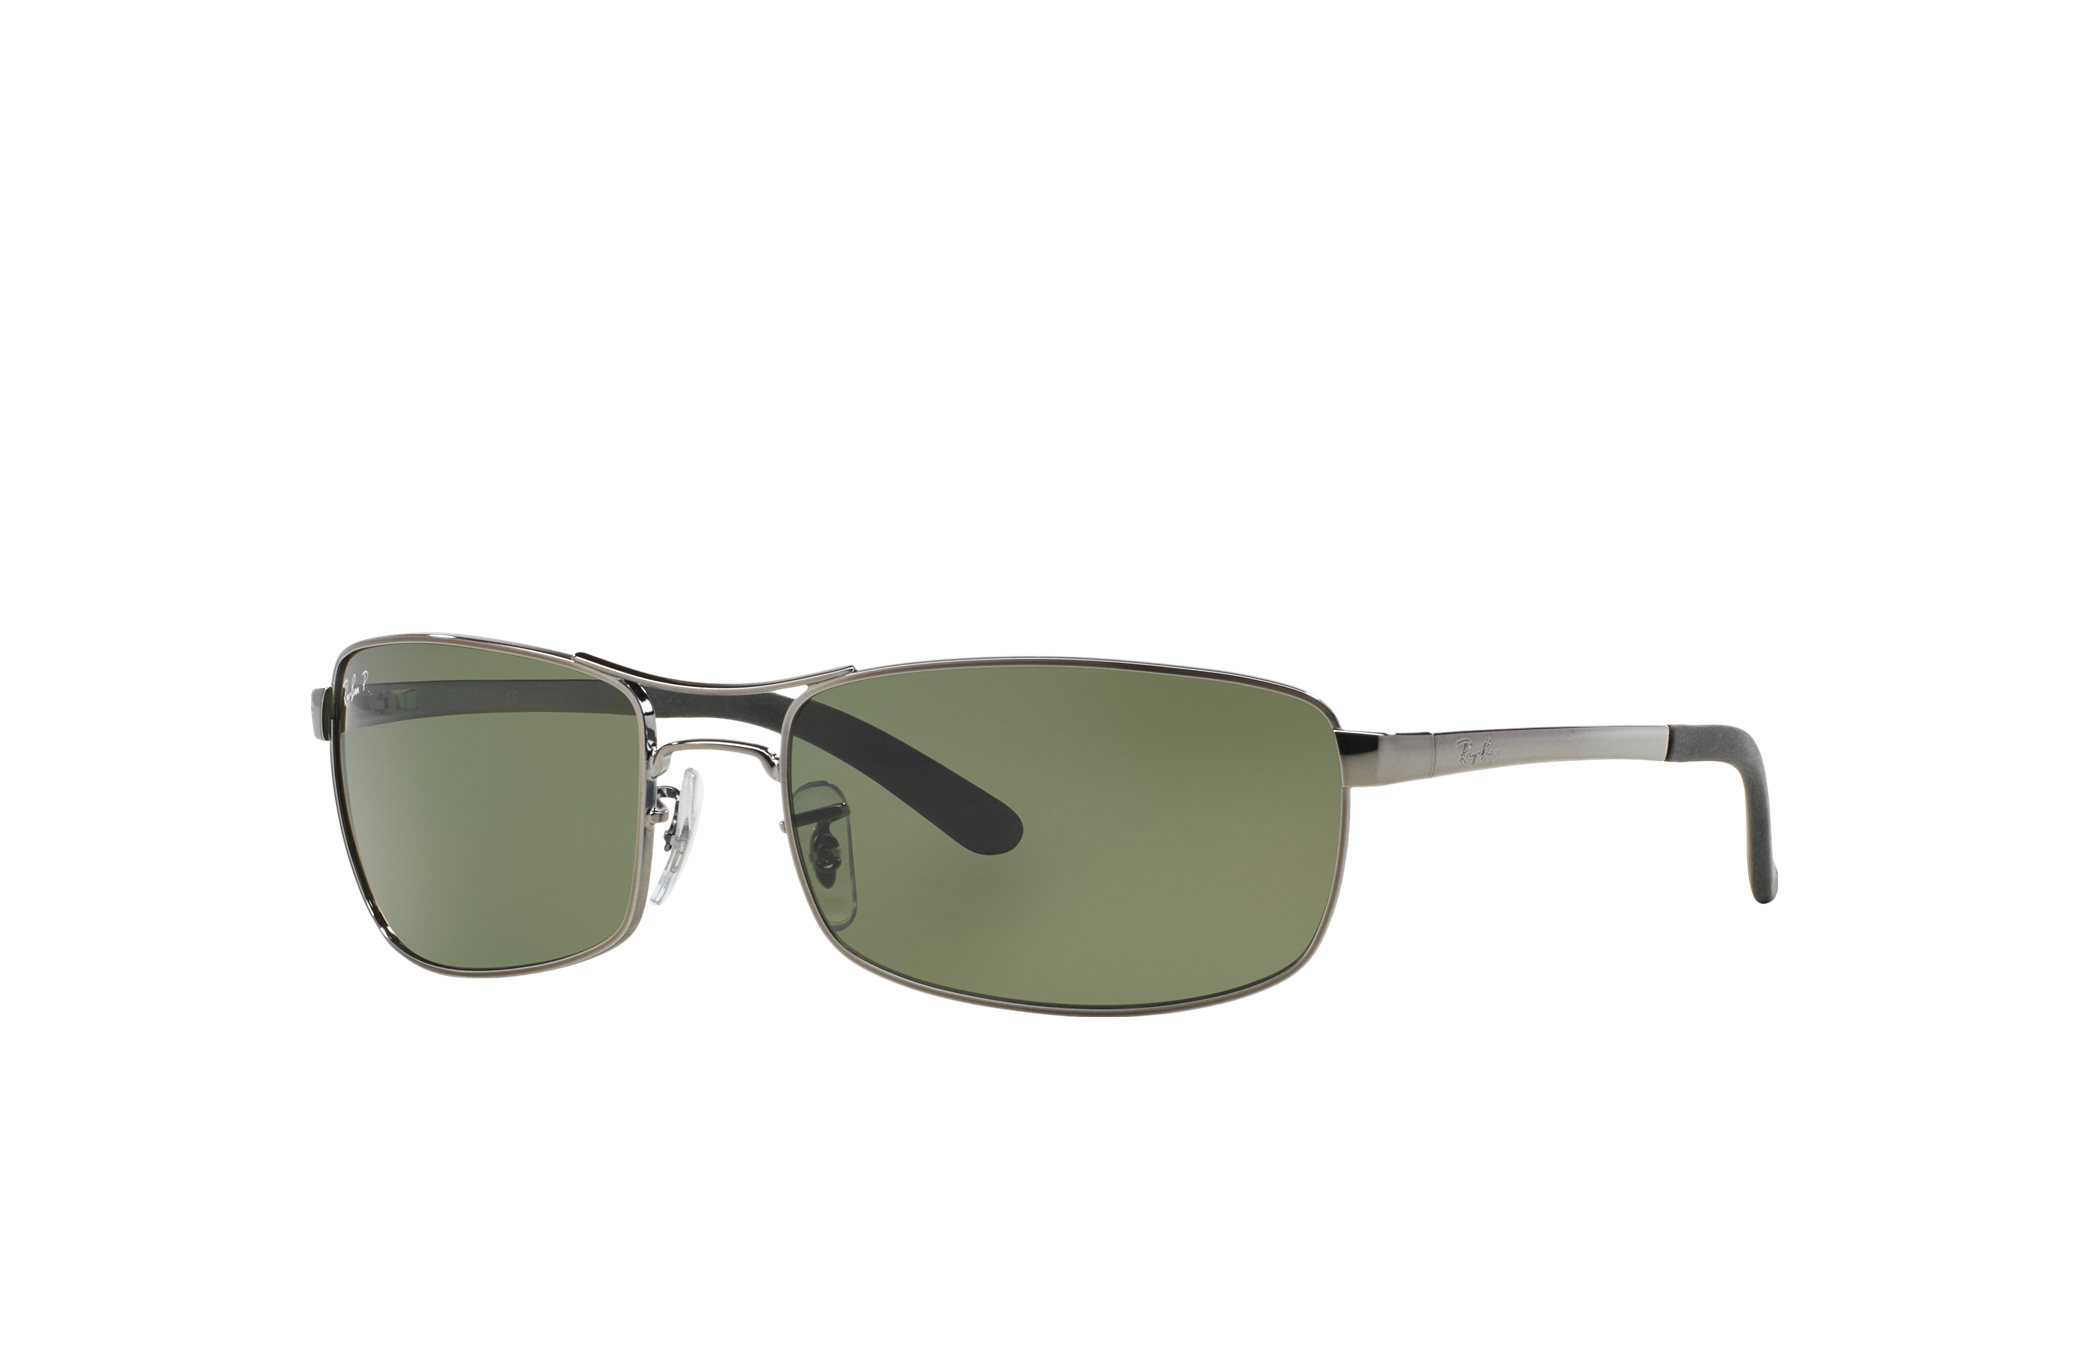 Rb3212 Sunglasses in Gunmetal and Green - RB3212 | Ray-Ban® US